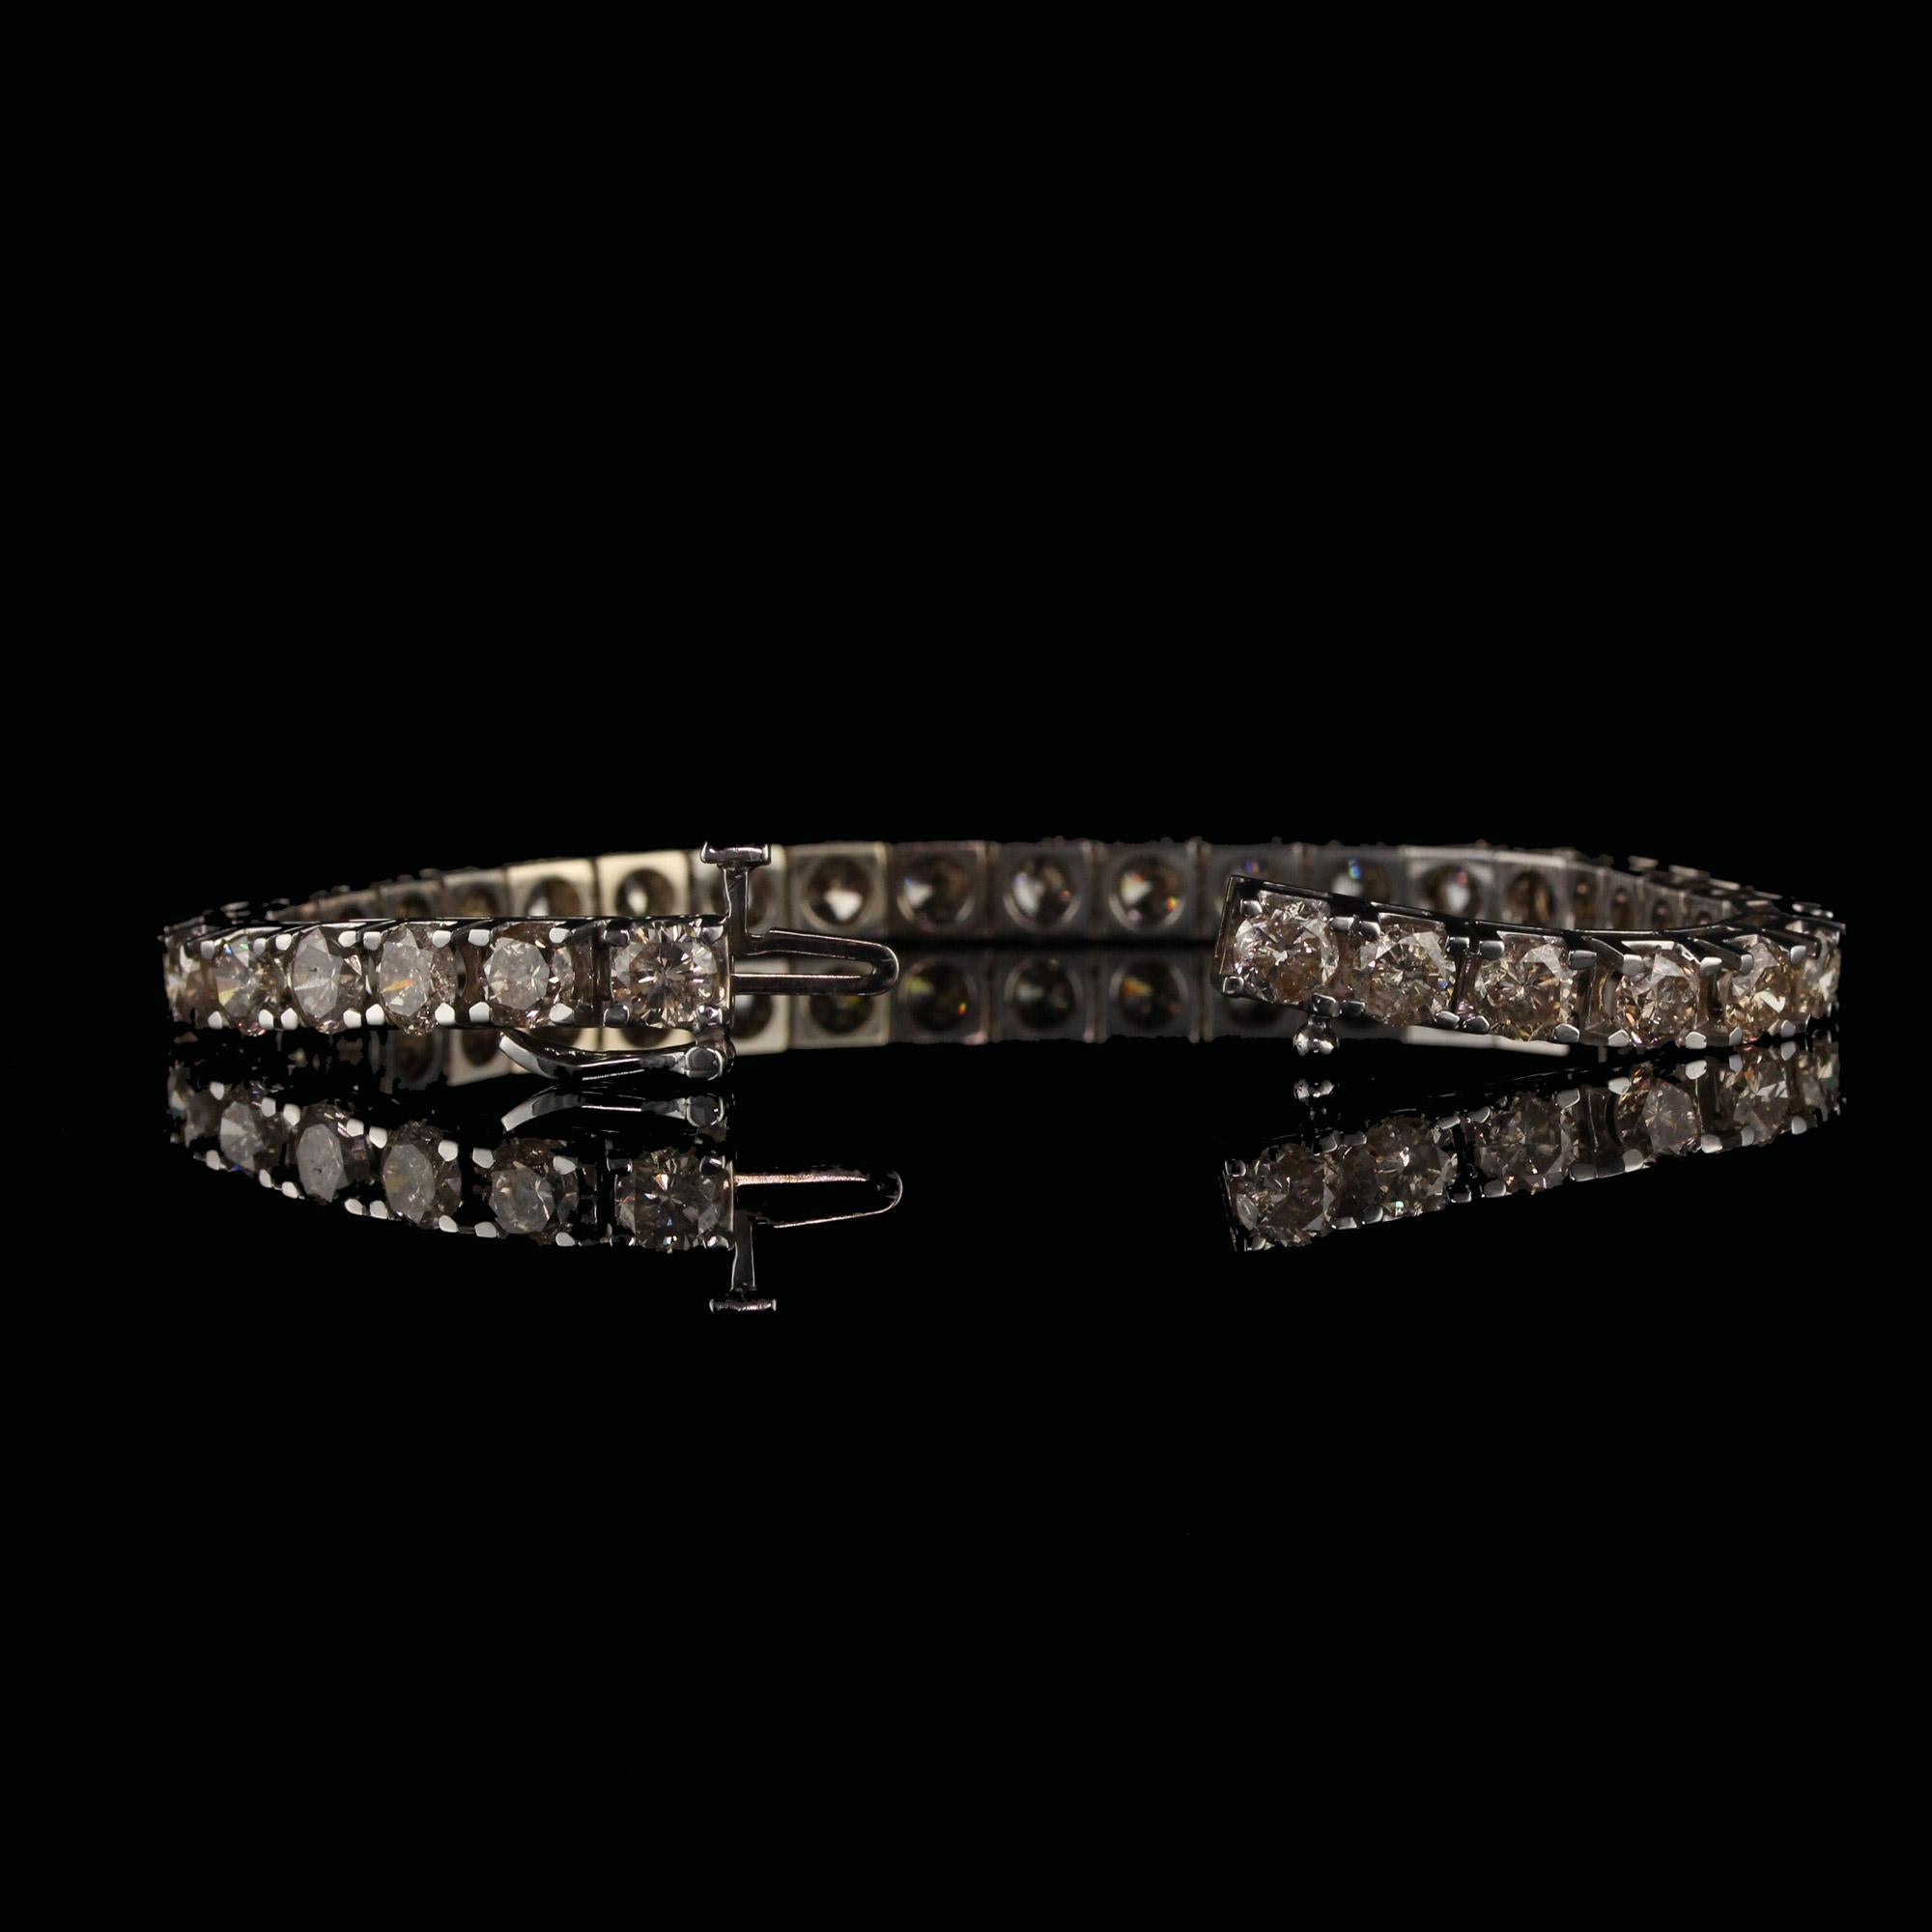 Vintage Estate 14 Karat White Gold Champagne Diamond Bracelet In Excellent Condition For Sale In Great Neck, NY